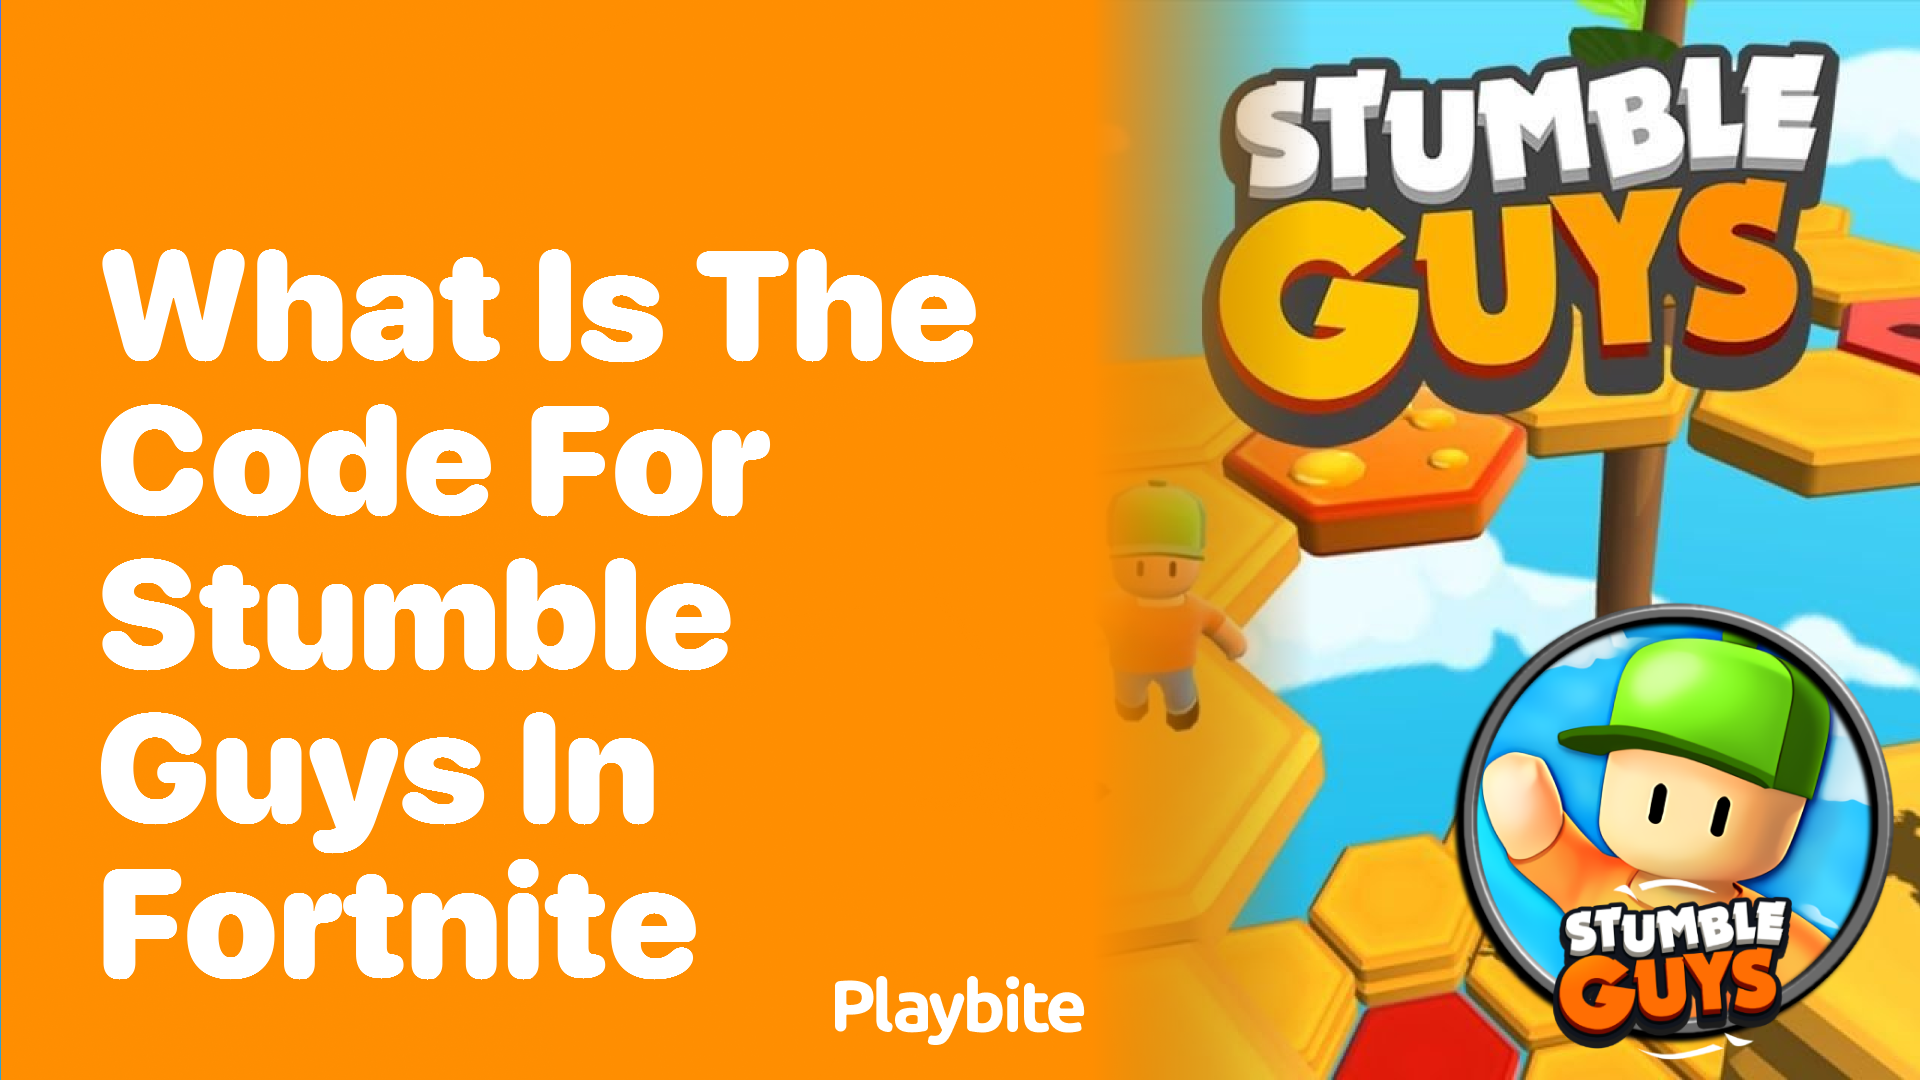 What Is the Code for Stumble Guys in Fortnite?